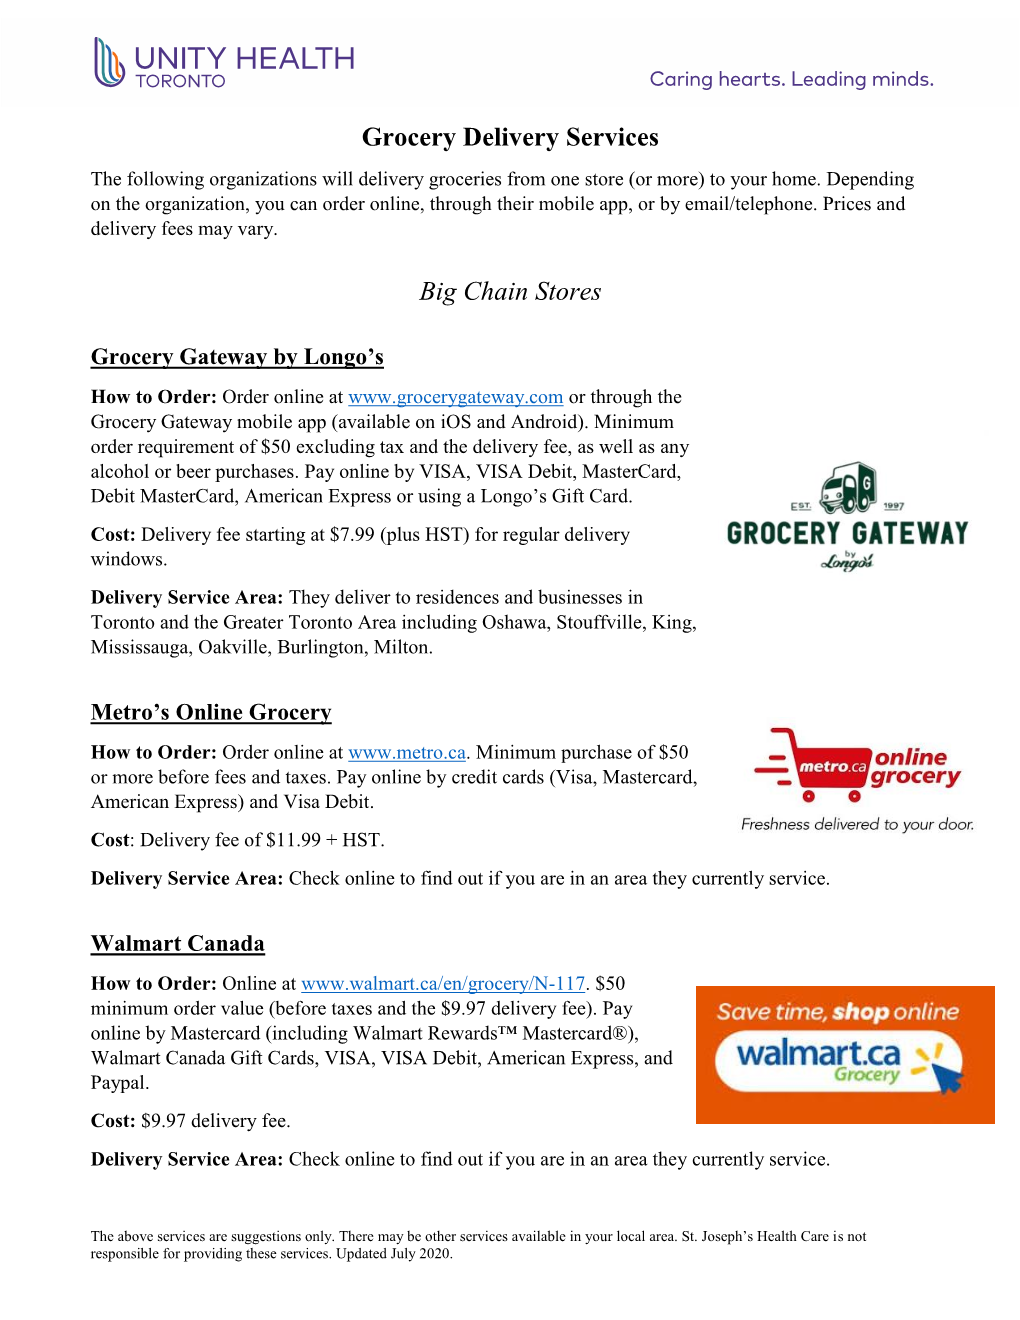 Grocery Delivery Services the Following Organizations Will Delivery Groceries from One Store (Or More) to Your Home